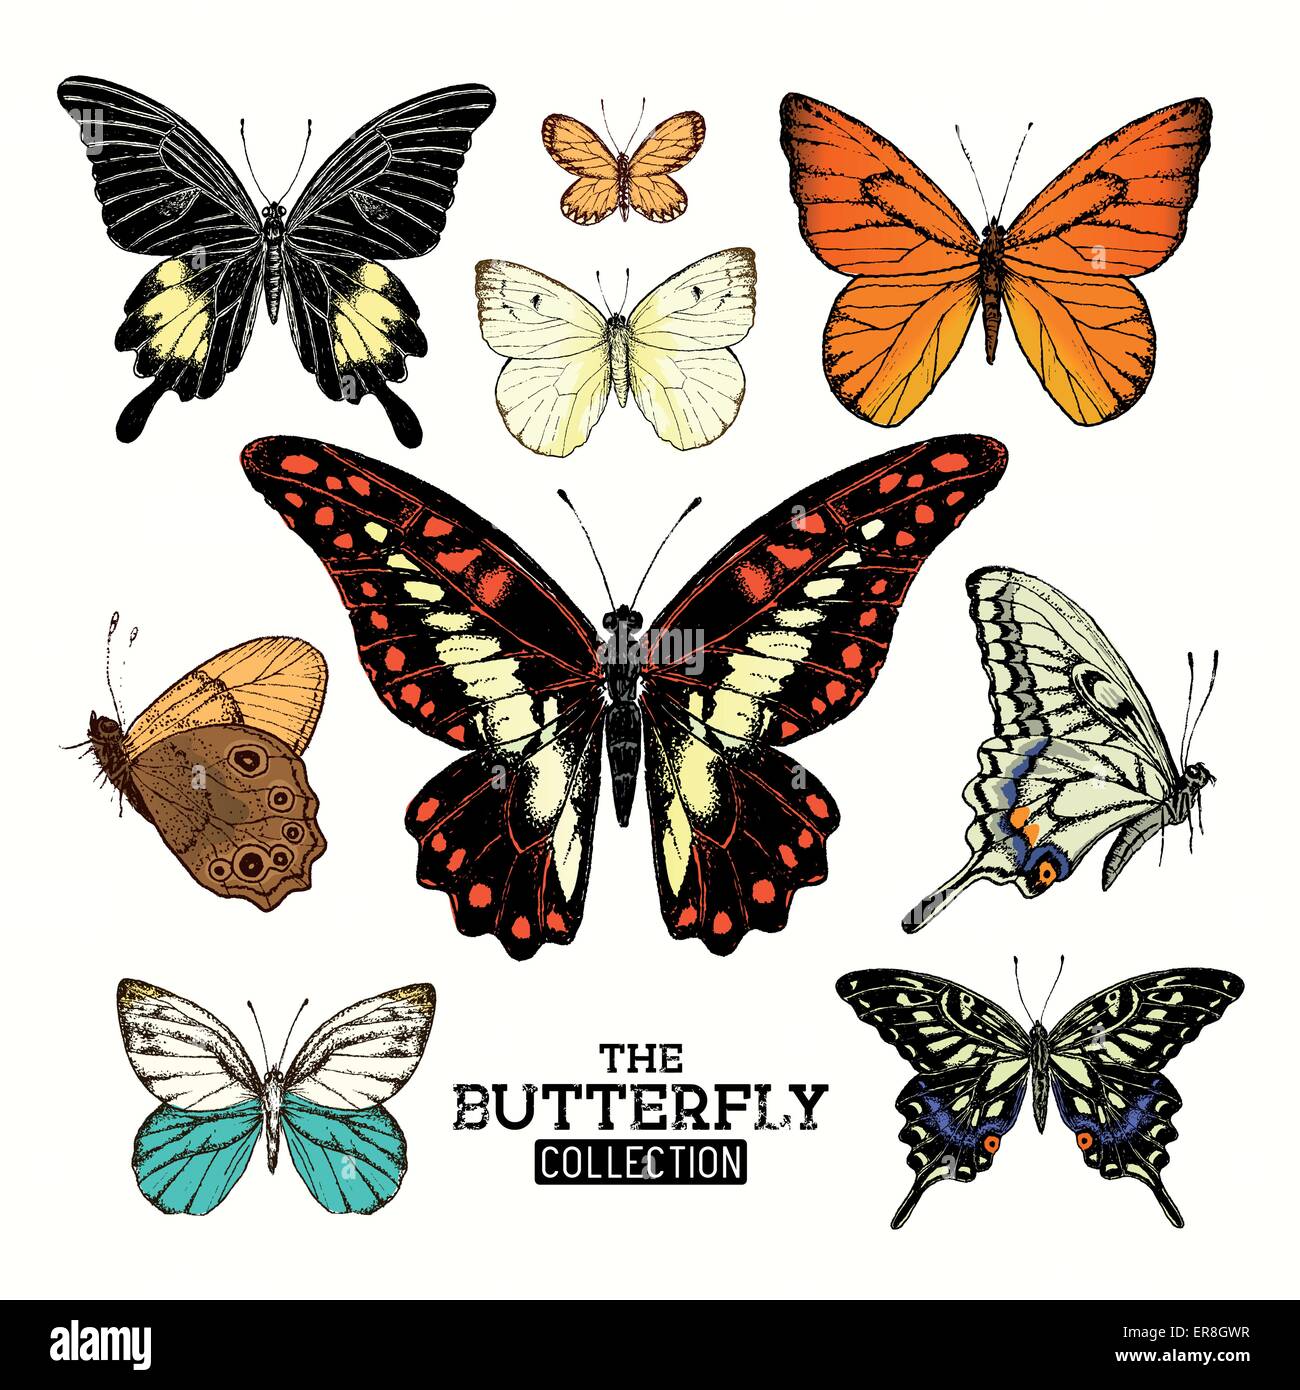 Realistic Butterfly Collection. A set of butterflies, hand crafted vector illustration. Stock Vector